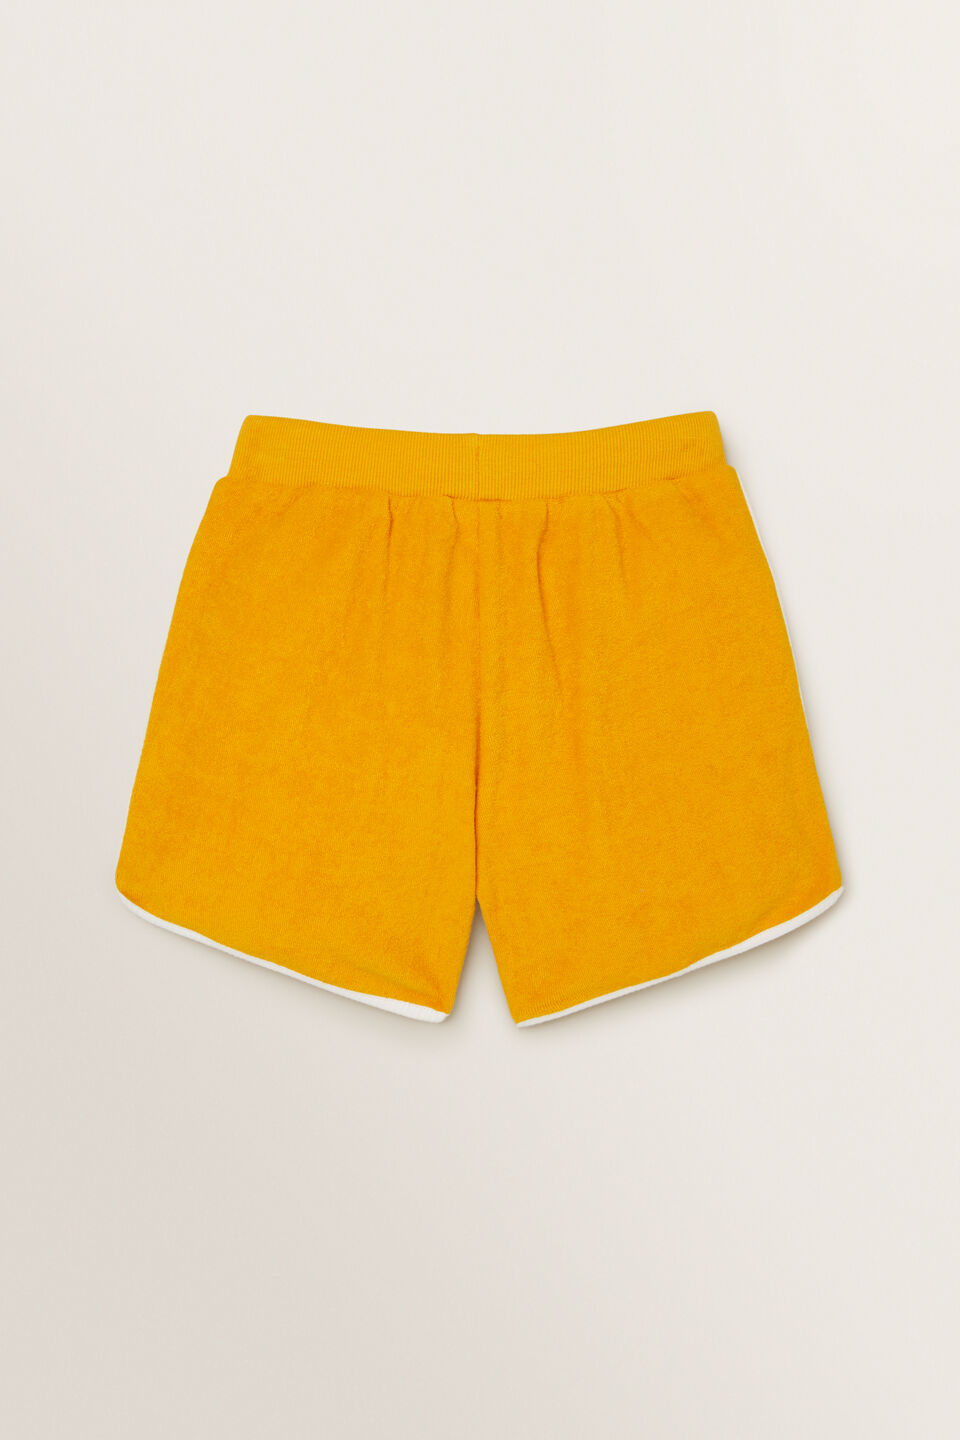 Terry Toweling Shorts  